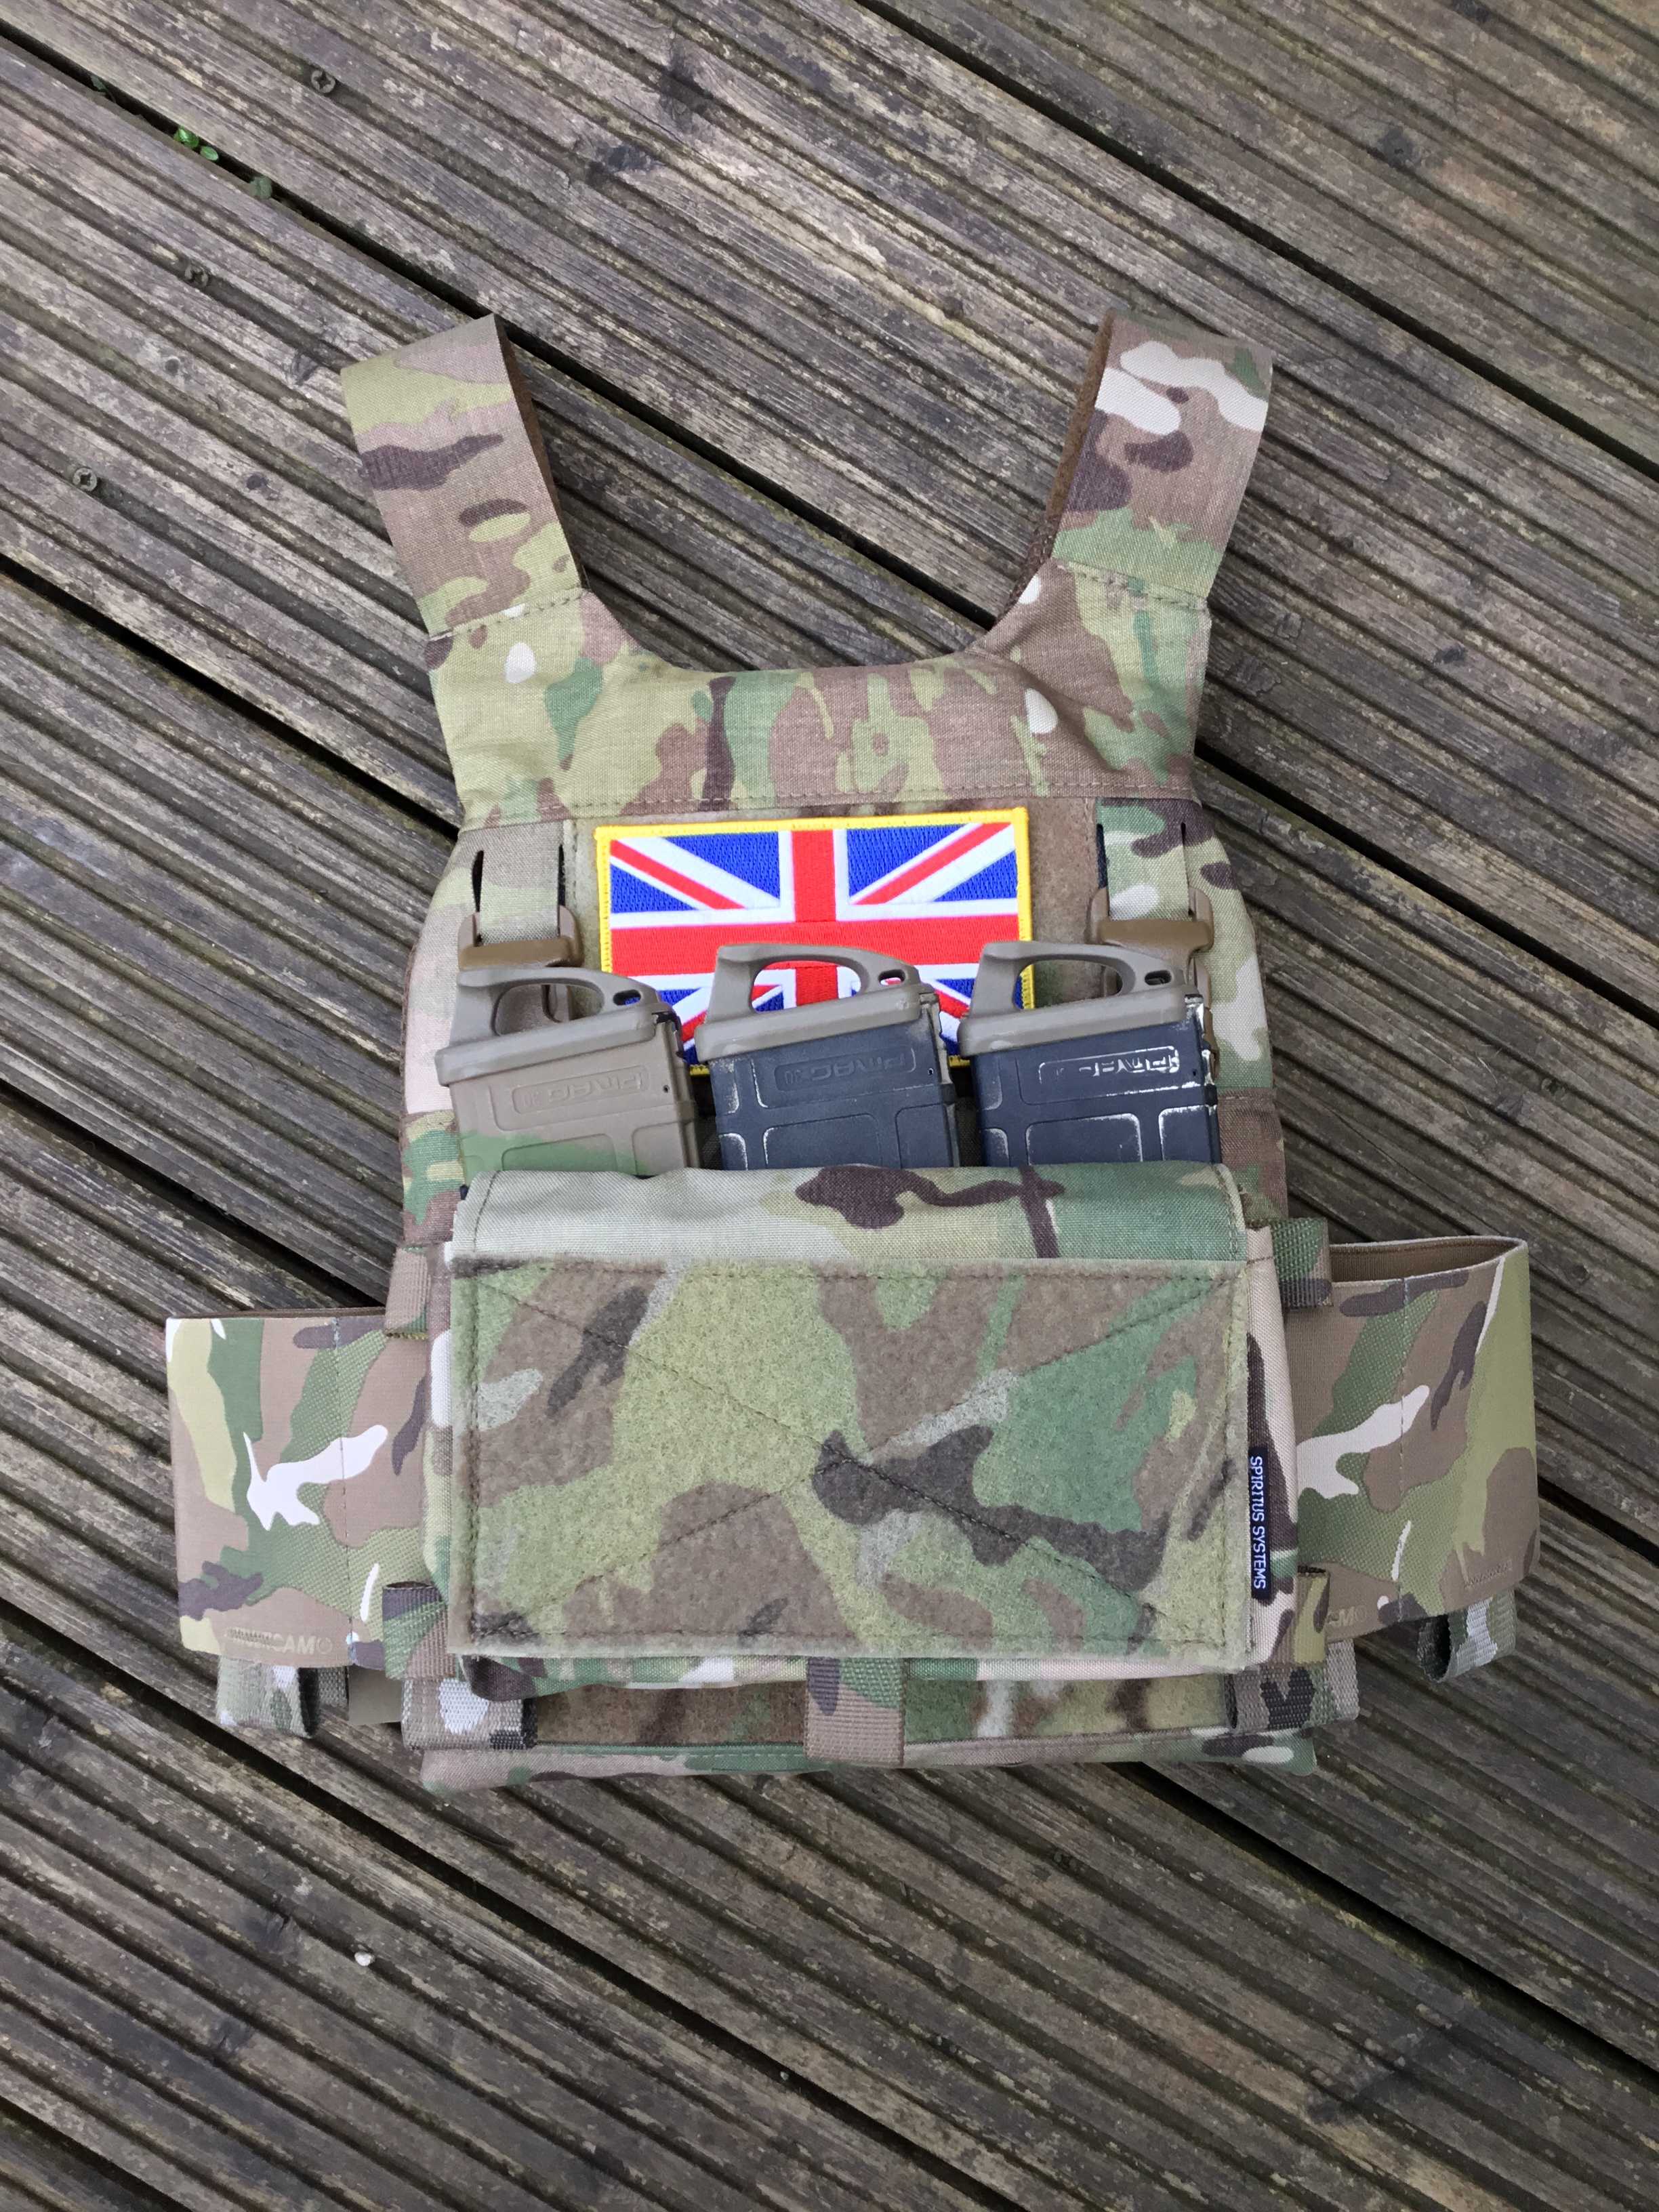 REVIEW: Ferro Concepts The Slickster 2017 Plate Carrier – The